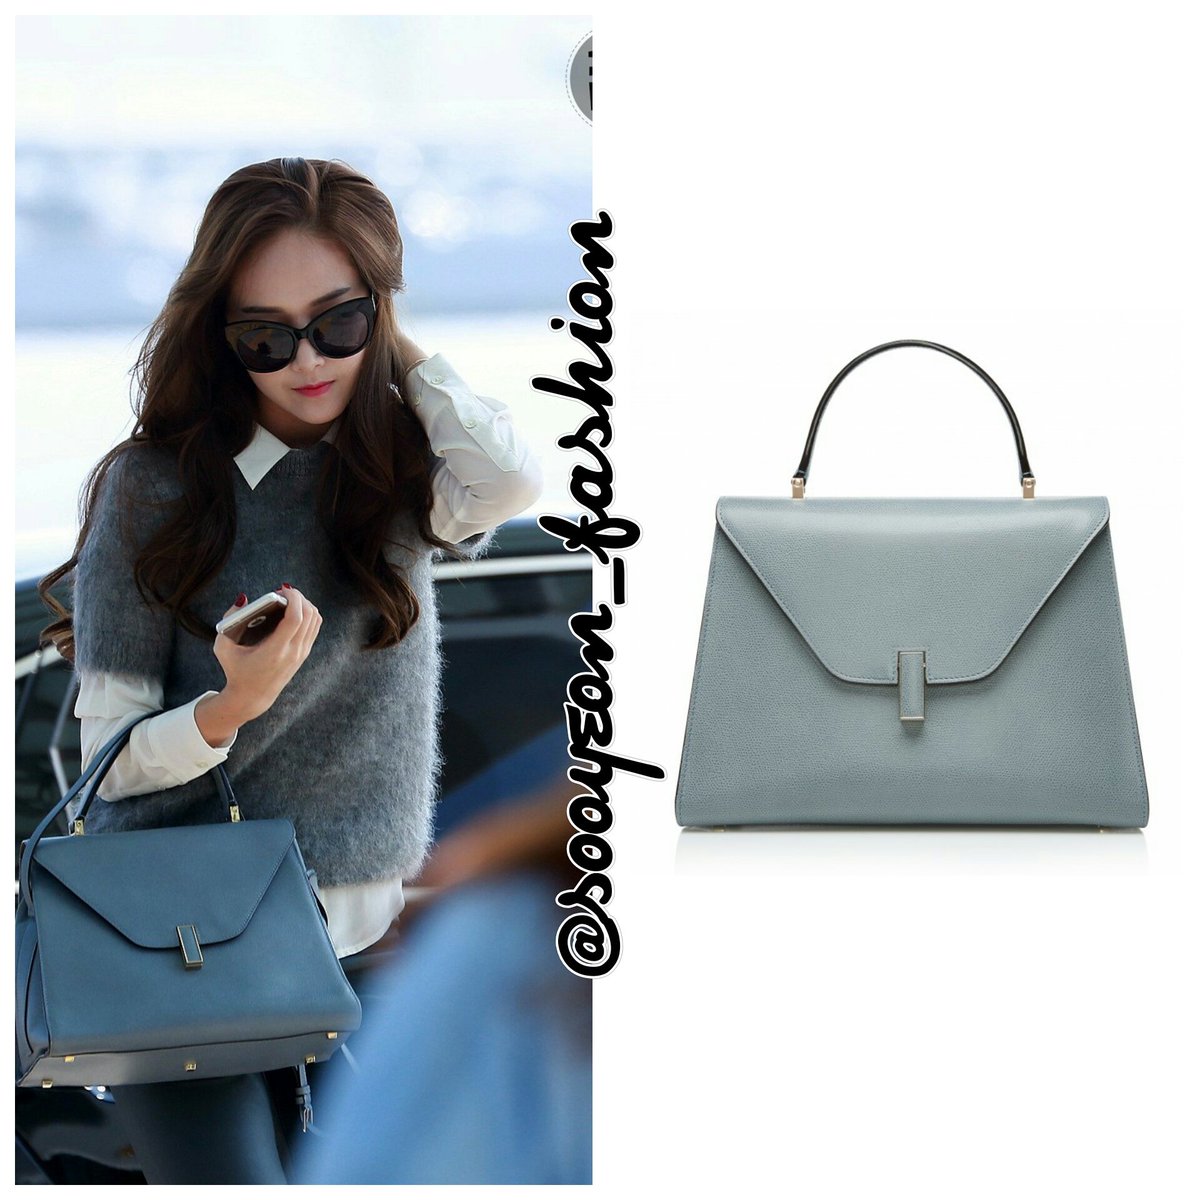 jsy fashion on X: 160706 Incheon Airport BAG: Delvaux Tempete